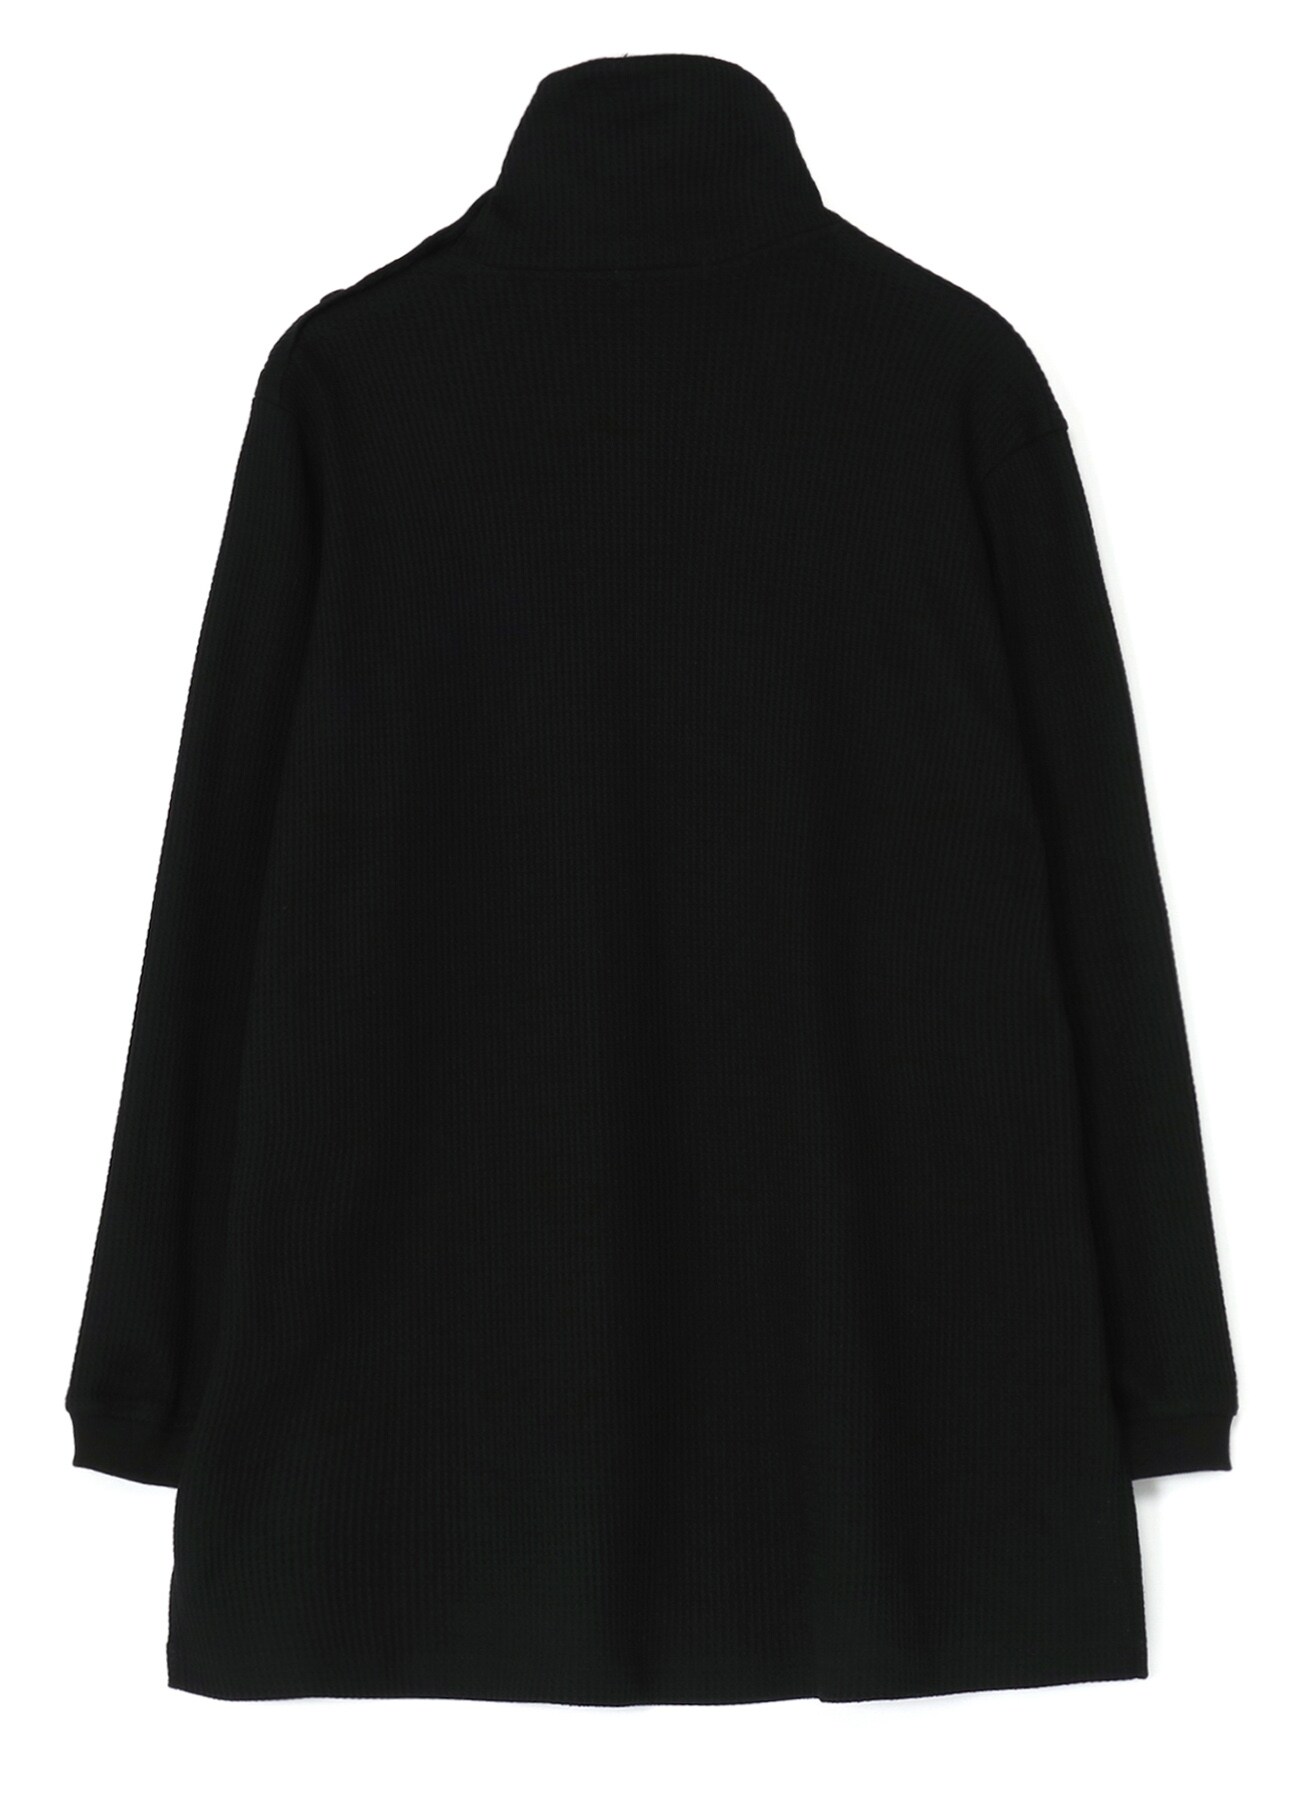 PE/COTTON WAFFLE-THERMAL HIGH NECK LONG SLEEVE T-SHIRT(M Black): S